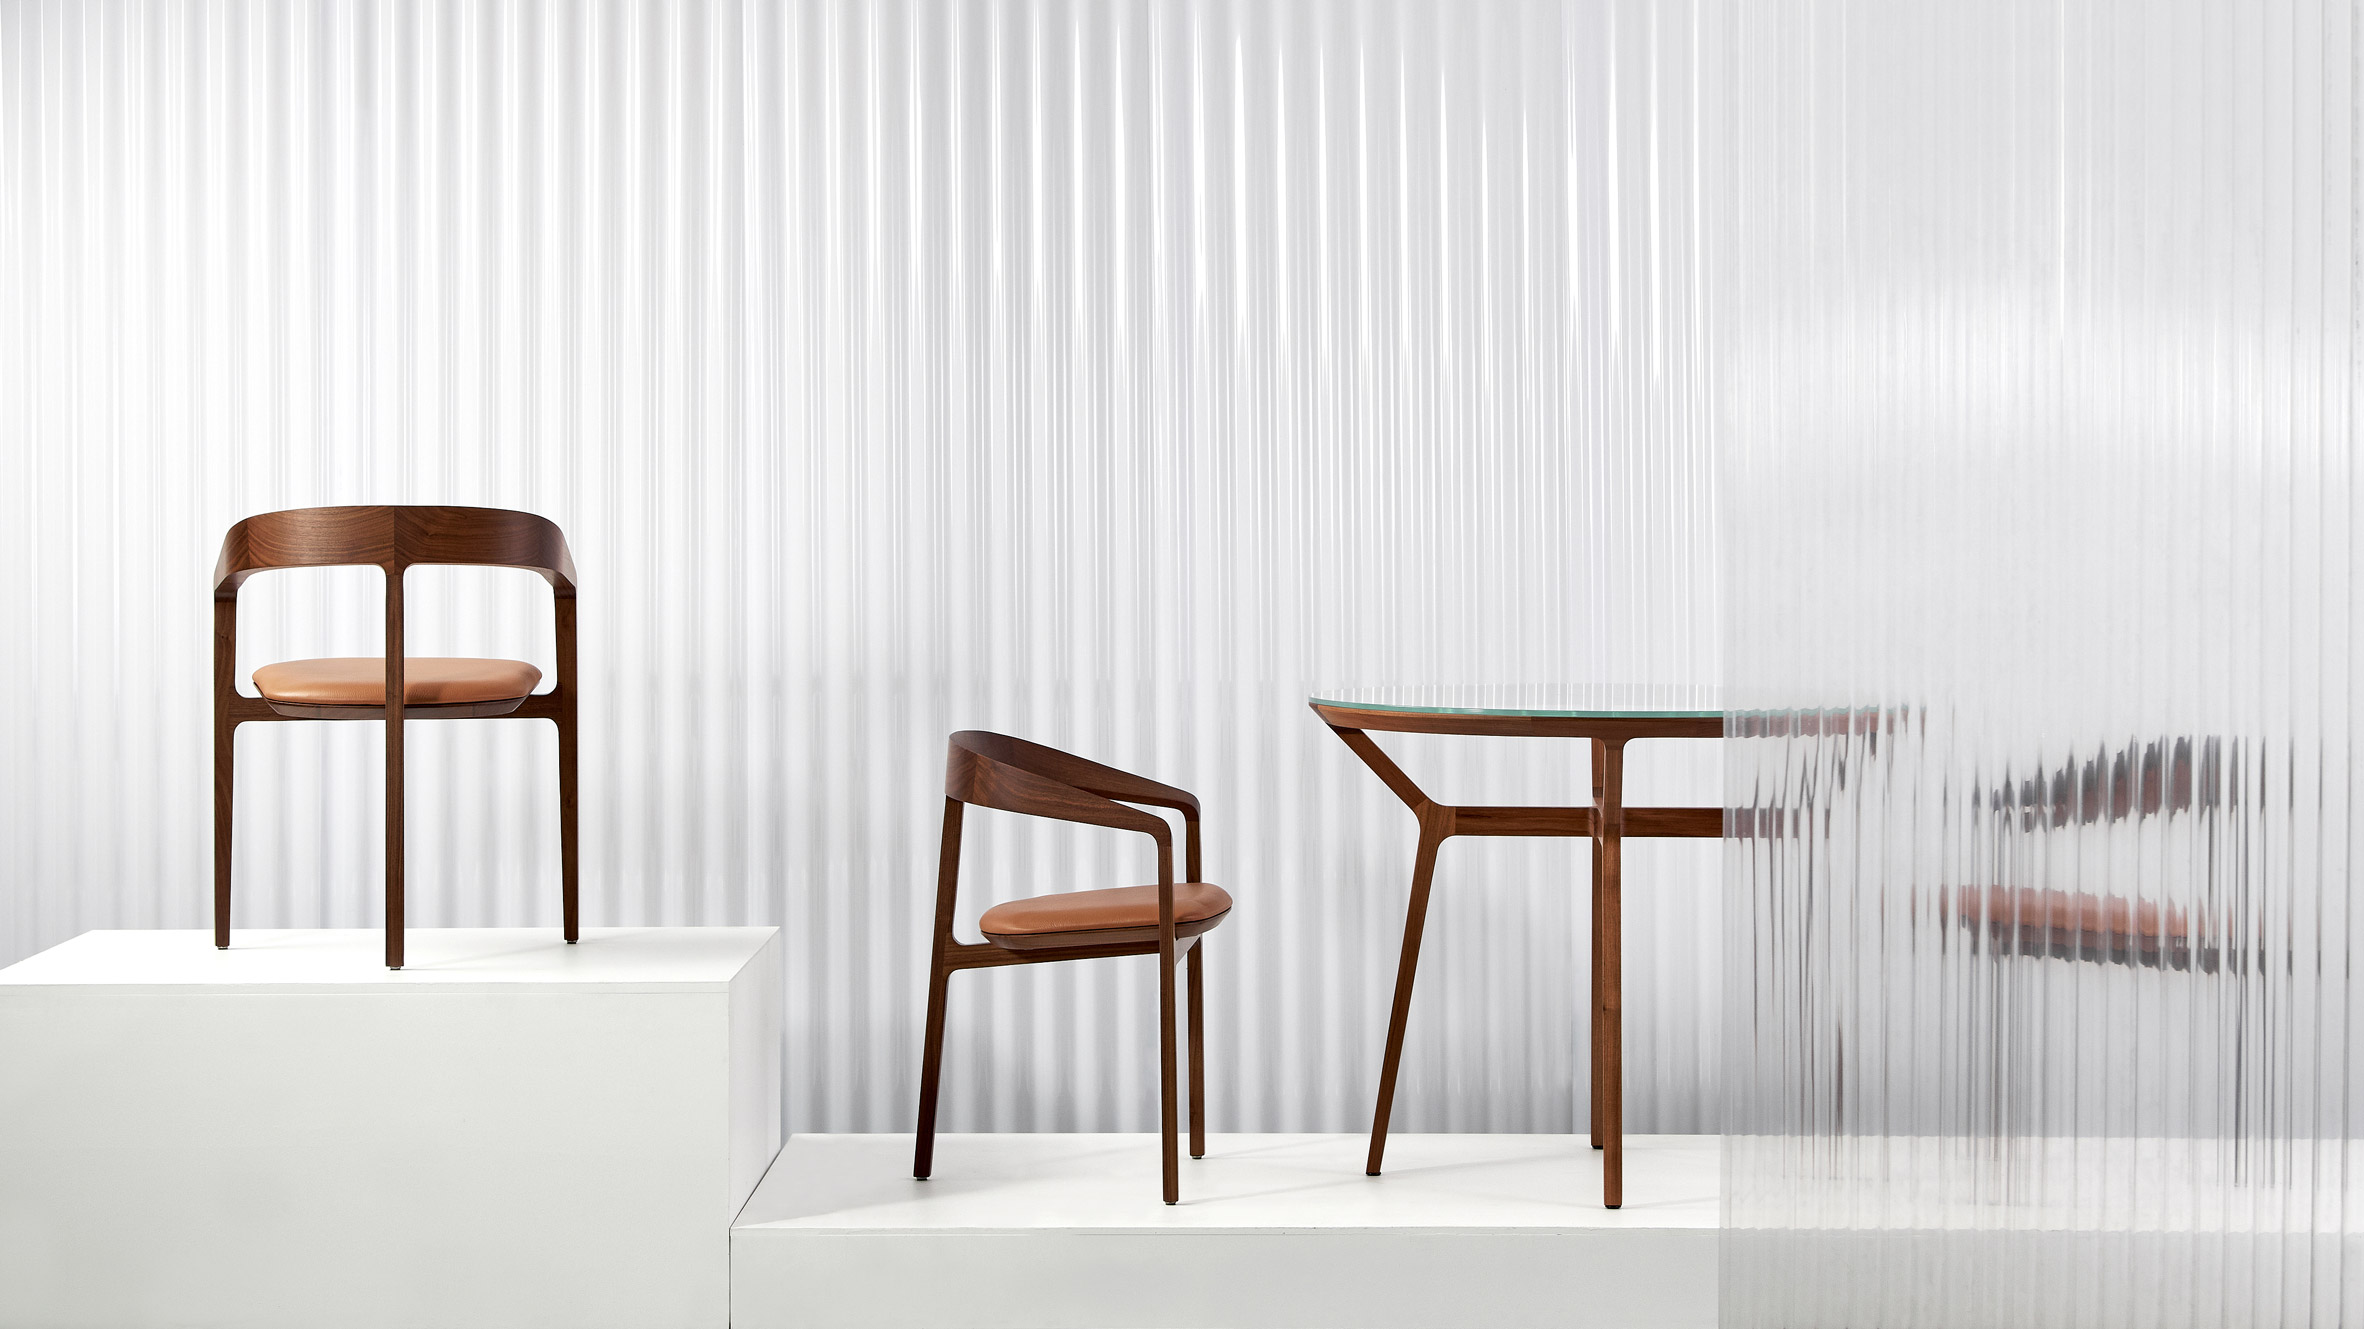 Tom Fereday creates furniture collection for Louis Vuitton store